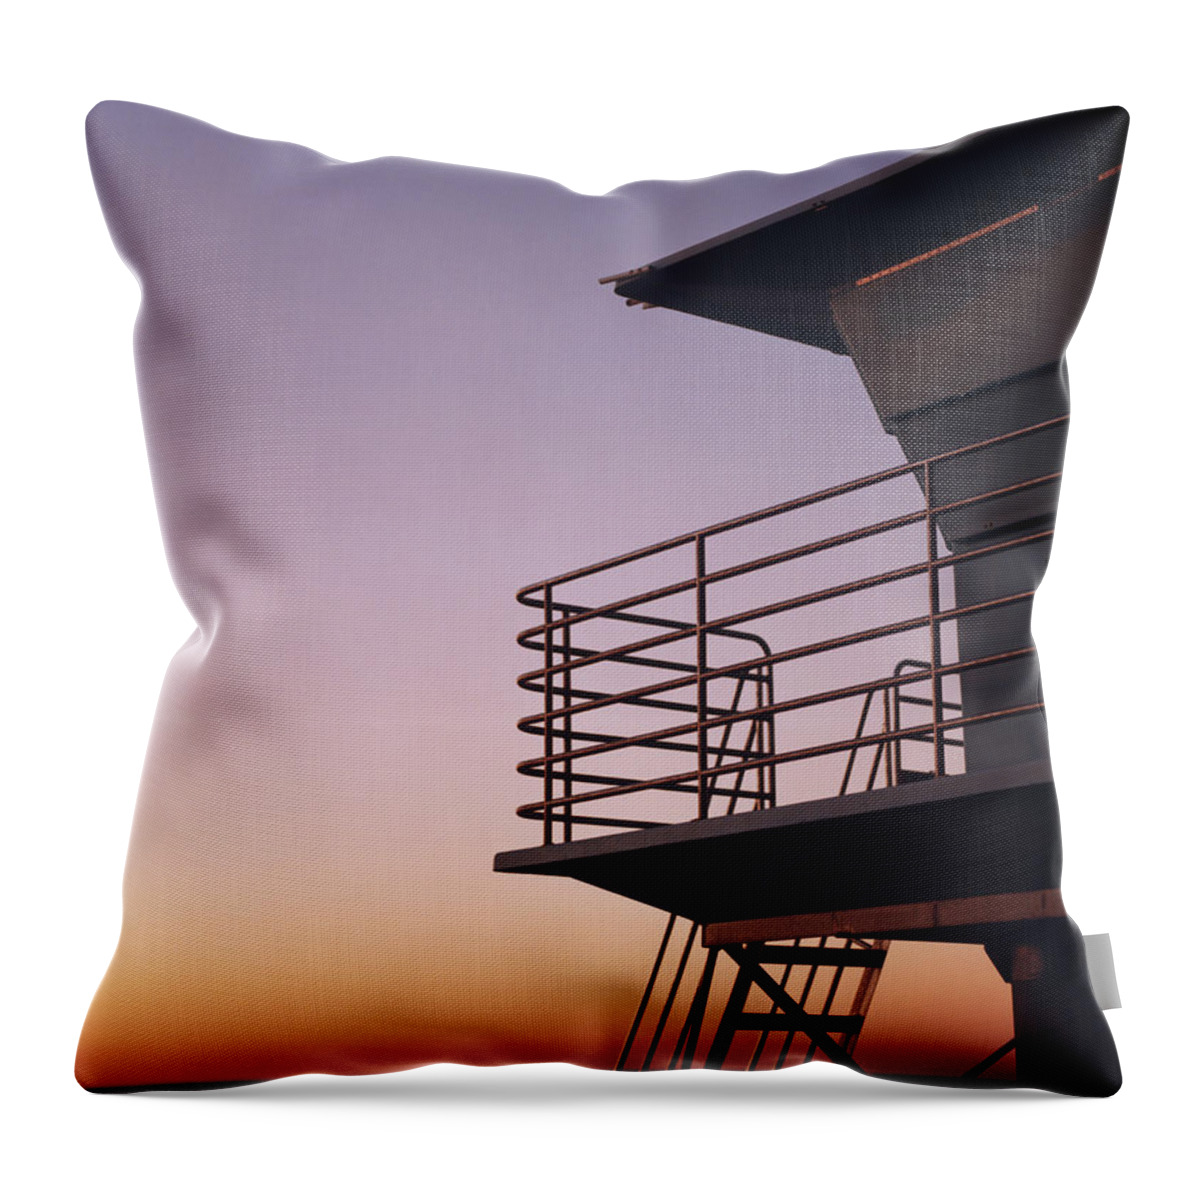 Scenics Throw Pillow featuring the photograph Lifeguard Stand On Beach At Sunset by Lisa Romerein